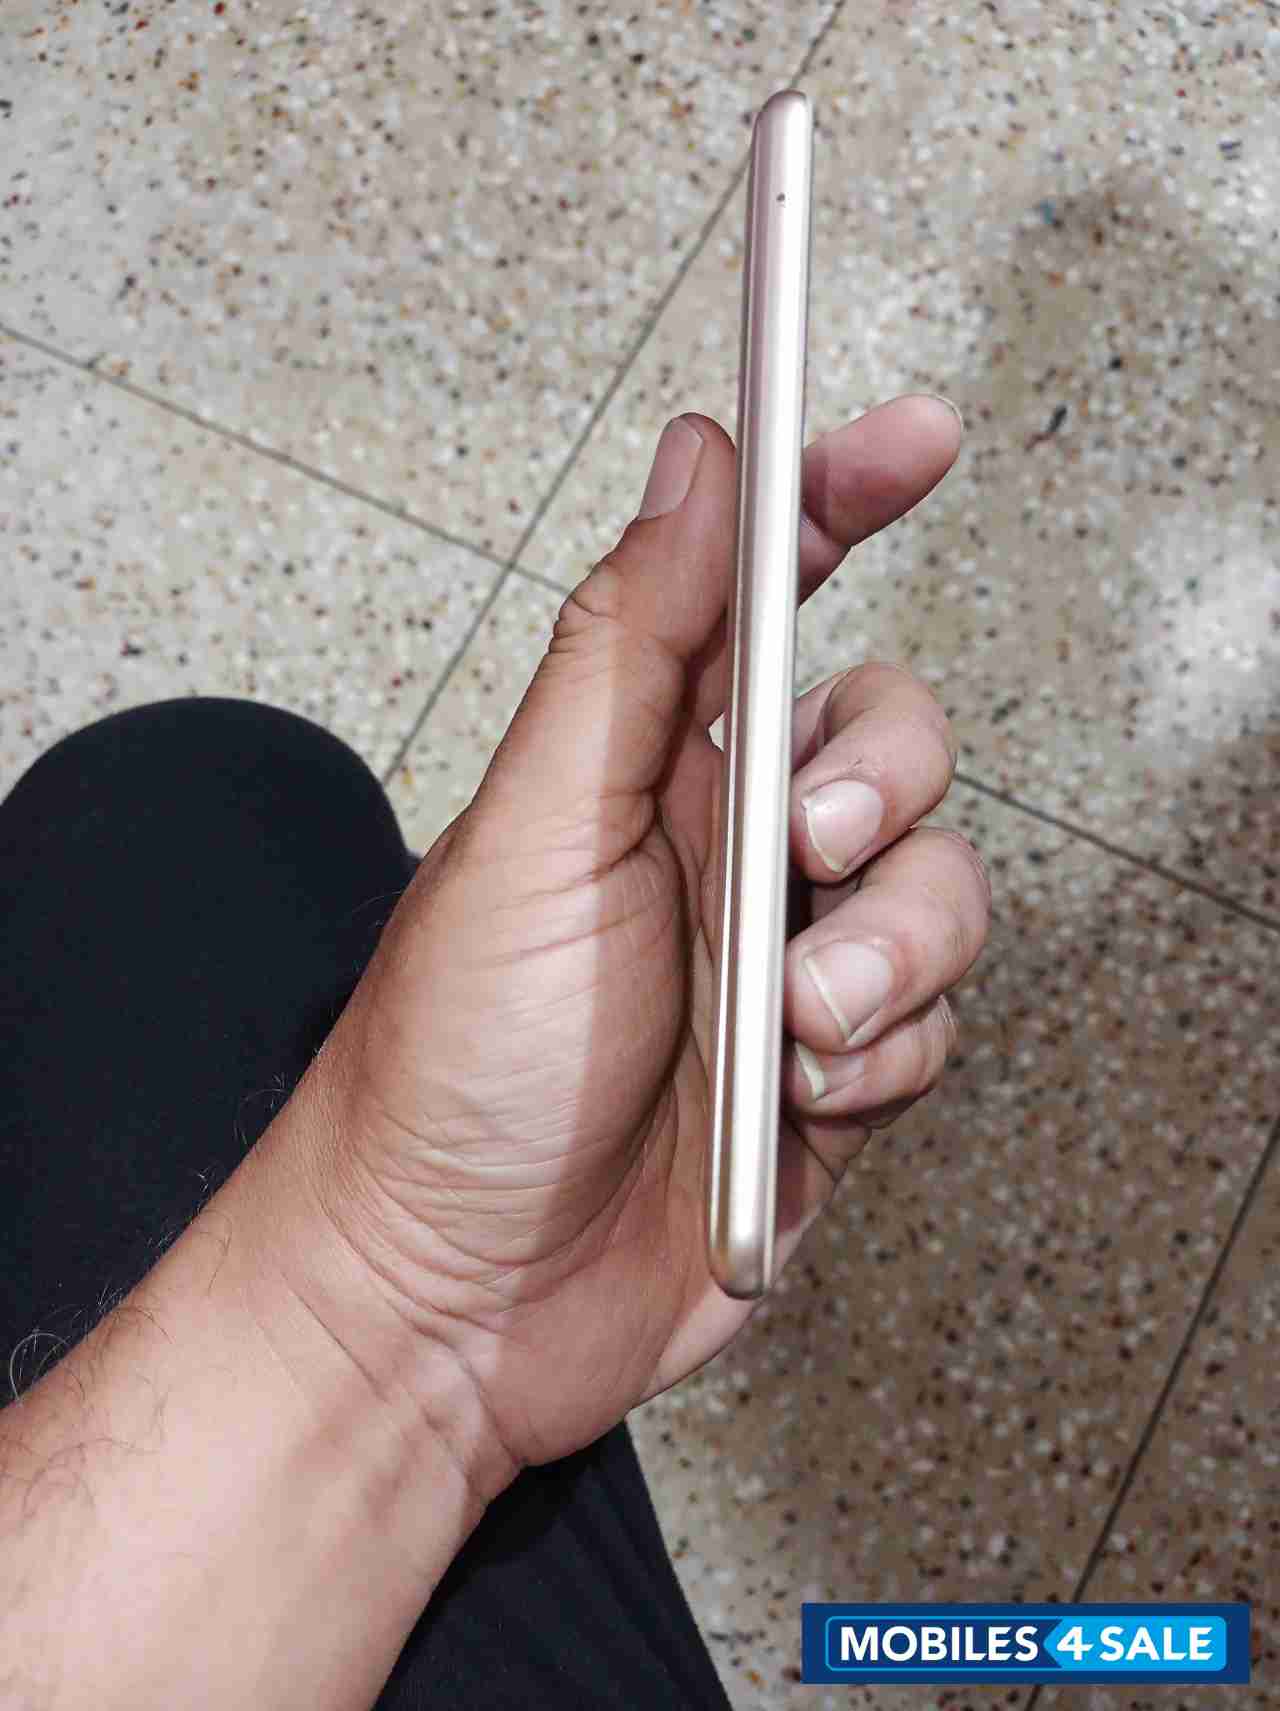 Coolpad  Coolpad note 6